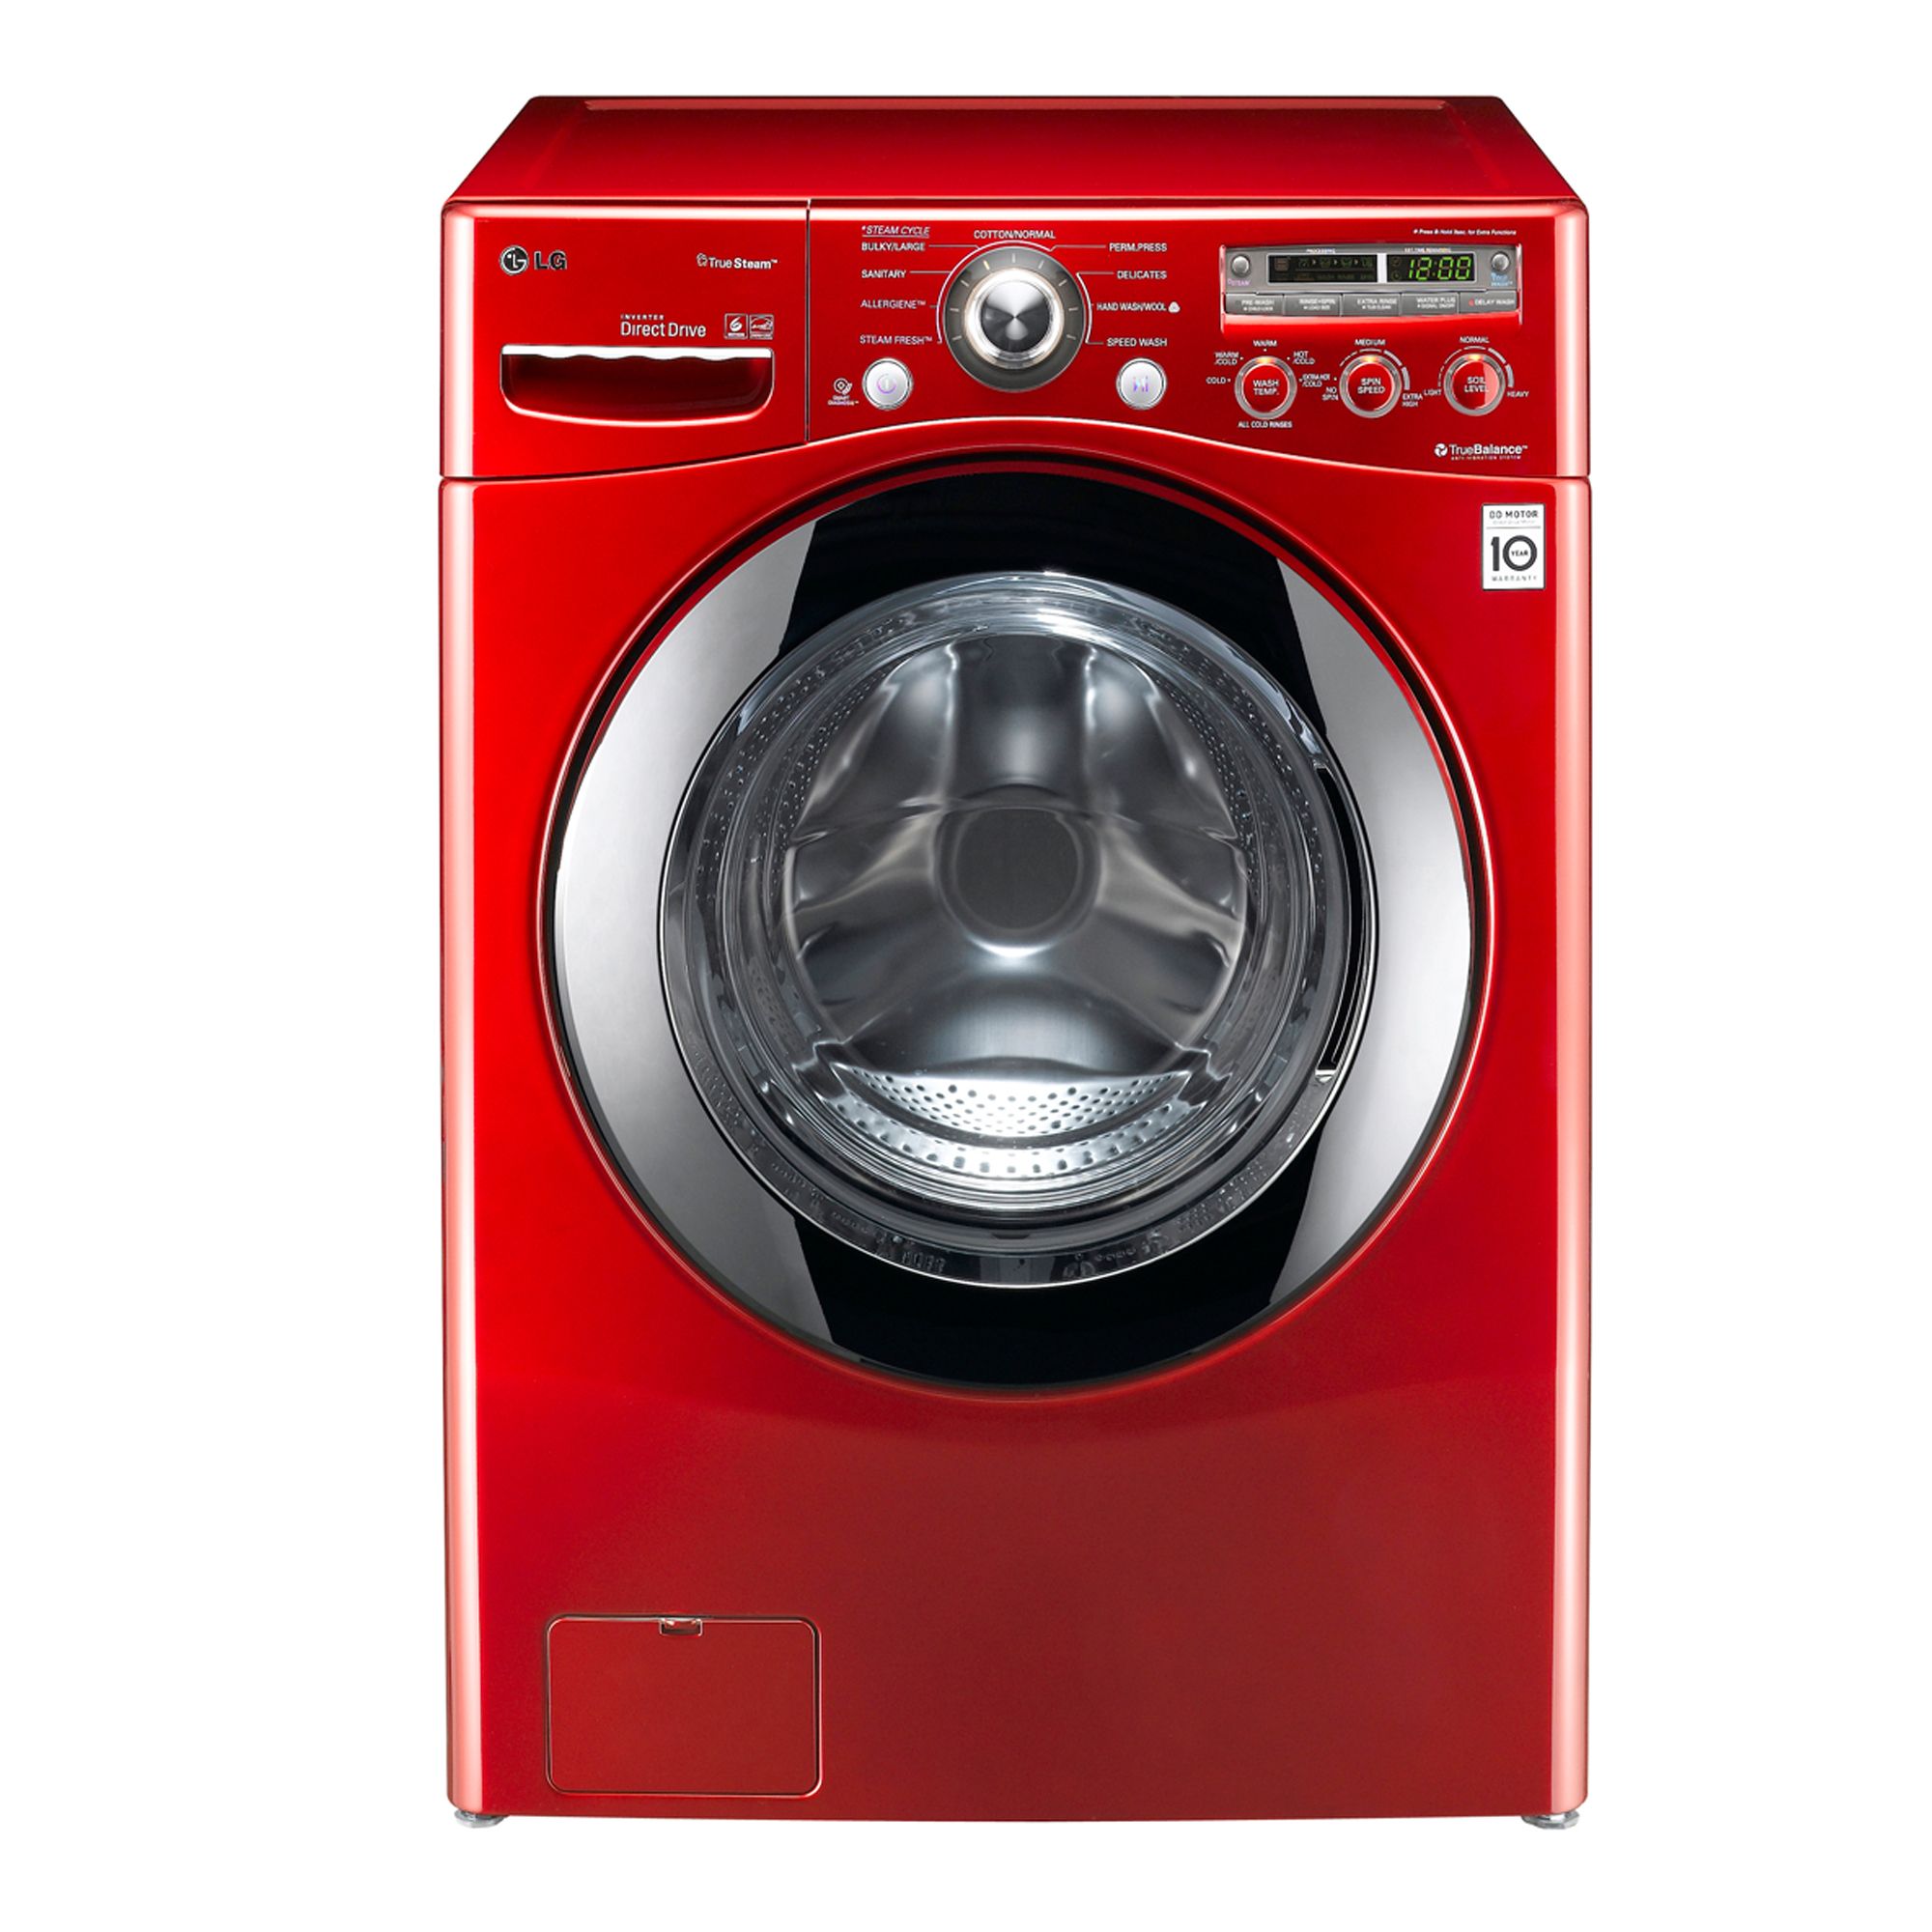 LG 3.7 cu. ft. Large Capacity, Front-Load Washer w/ TrueSteam Technology - Red